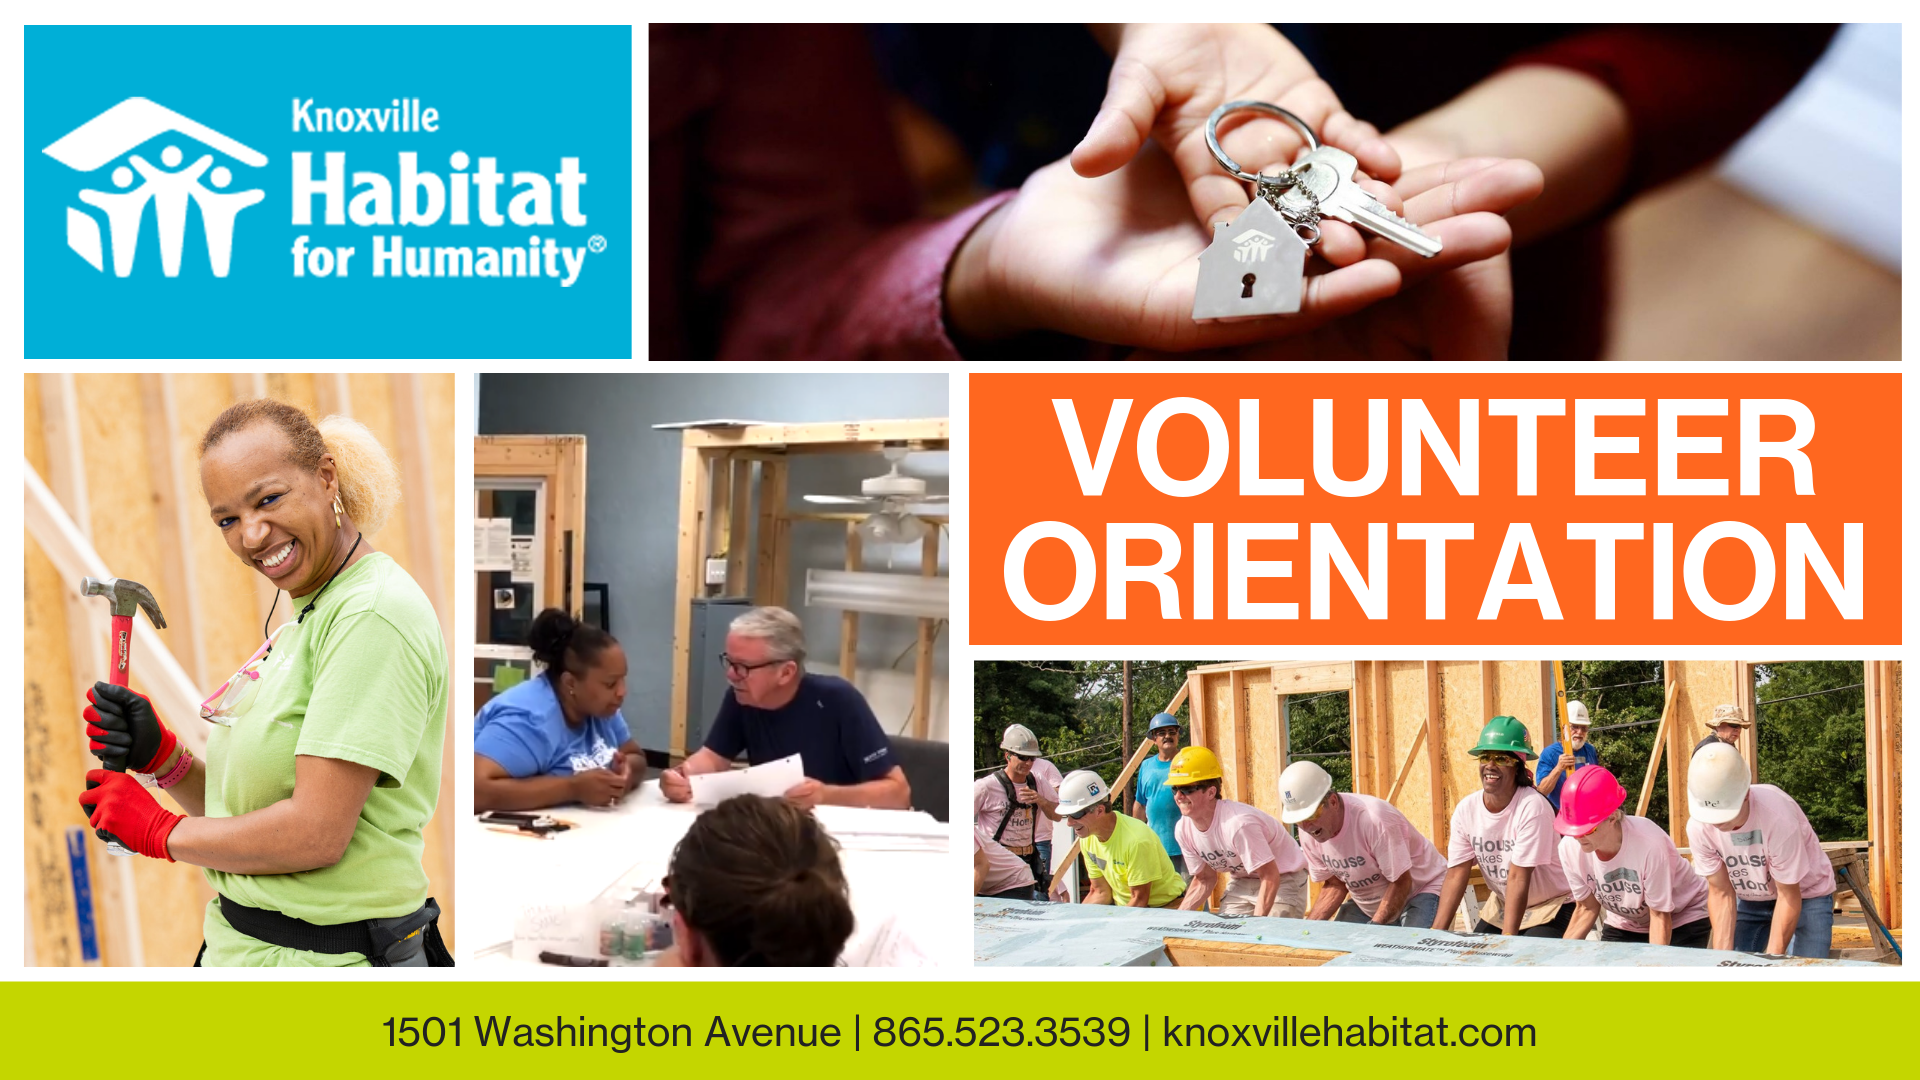 Knoxville Habitat Volunteer Orientation banner. Shows different photos of volunteers in action, doing construction and administrative work.